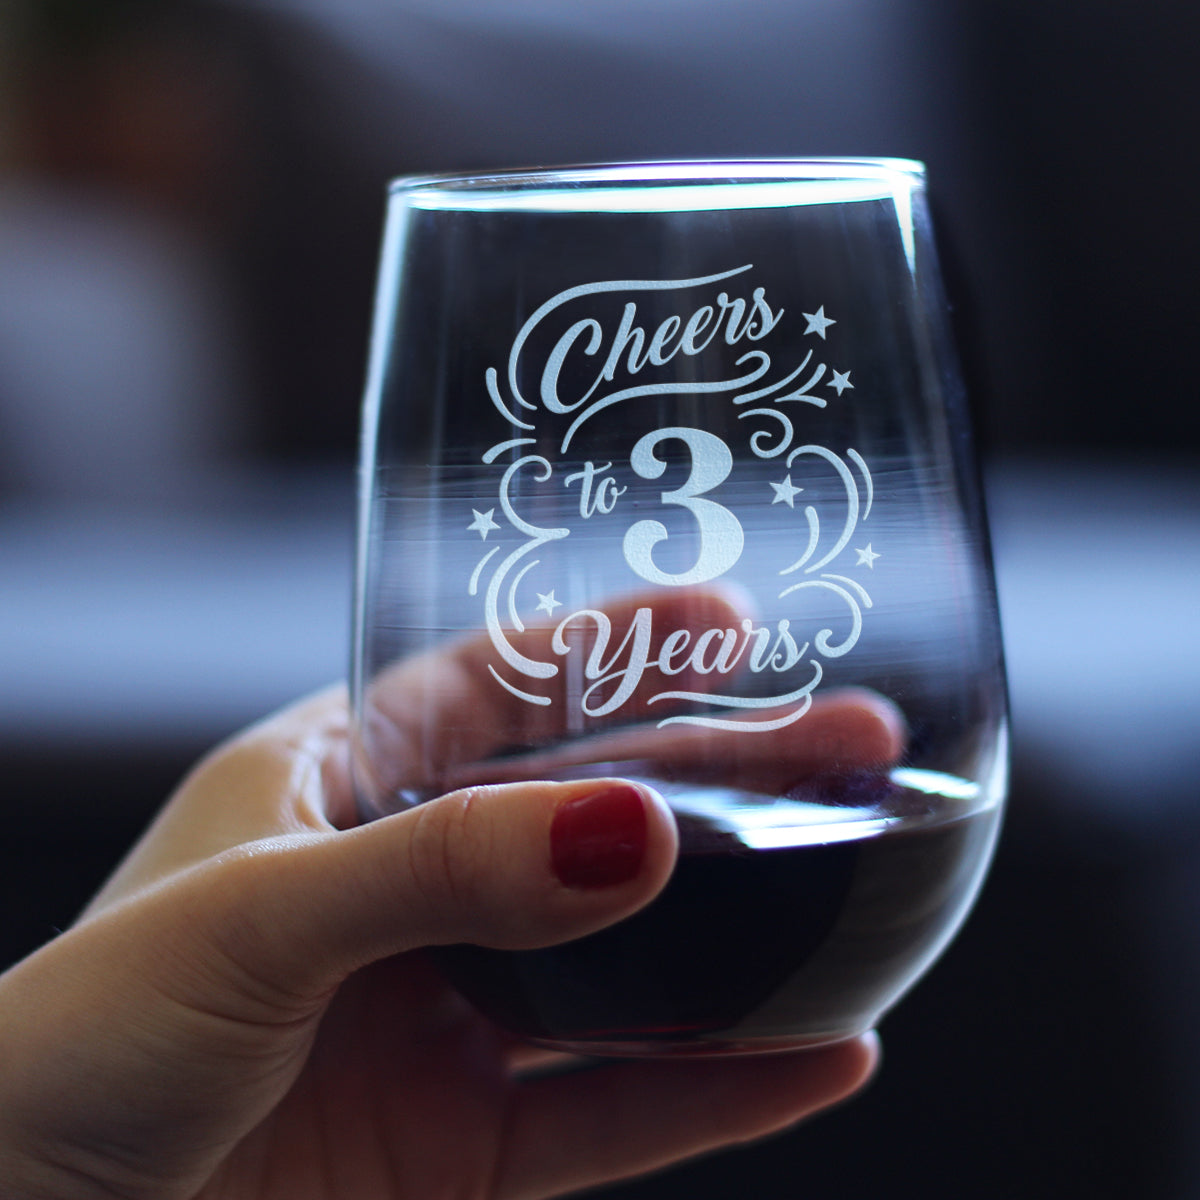 Cheers to 3 Years - Stemless Wine Glass Gifts for Women &amp; Men - 3rd Anniversary Party Decor - Large 17 Oz Glasses